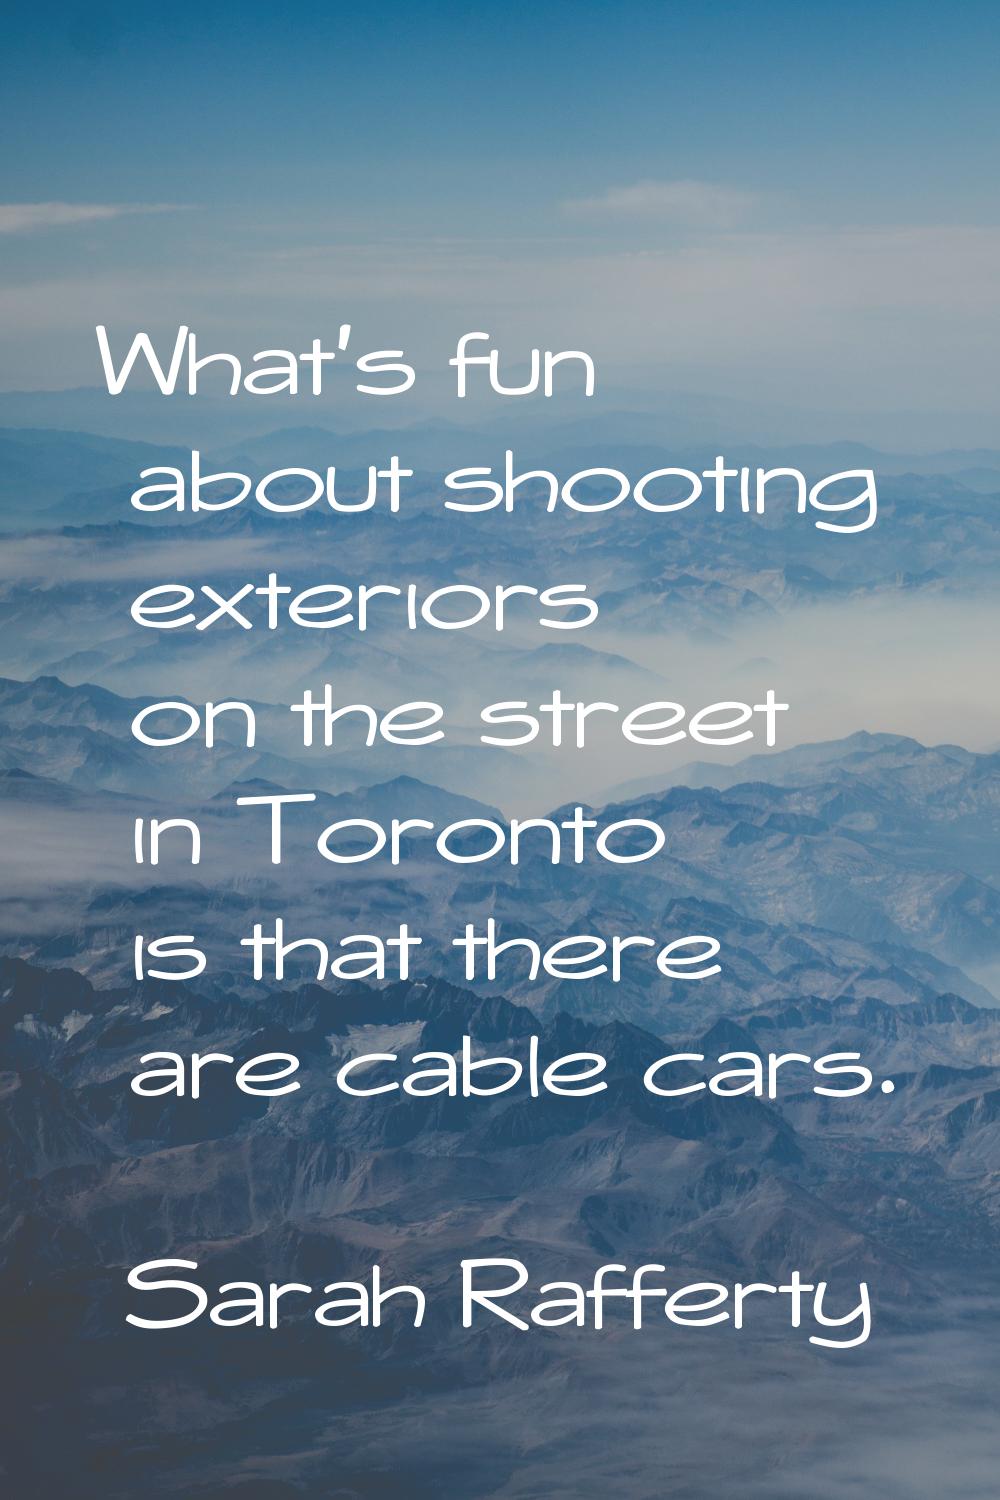 What's fun about shooting exteriors on the street in Toronto is that there are cable cars.